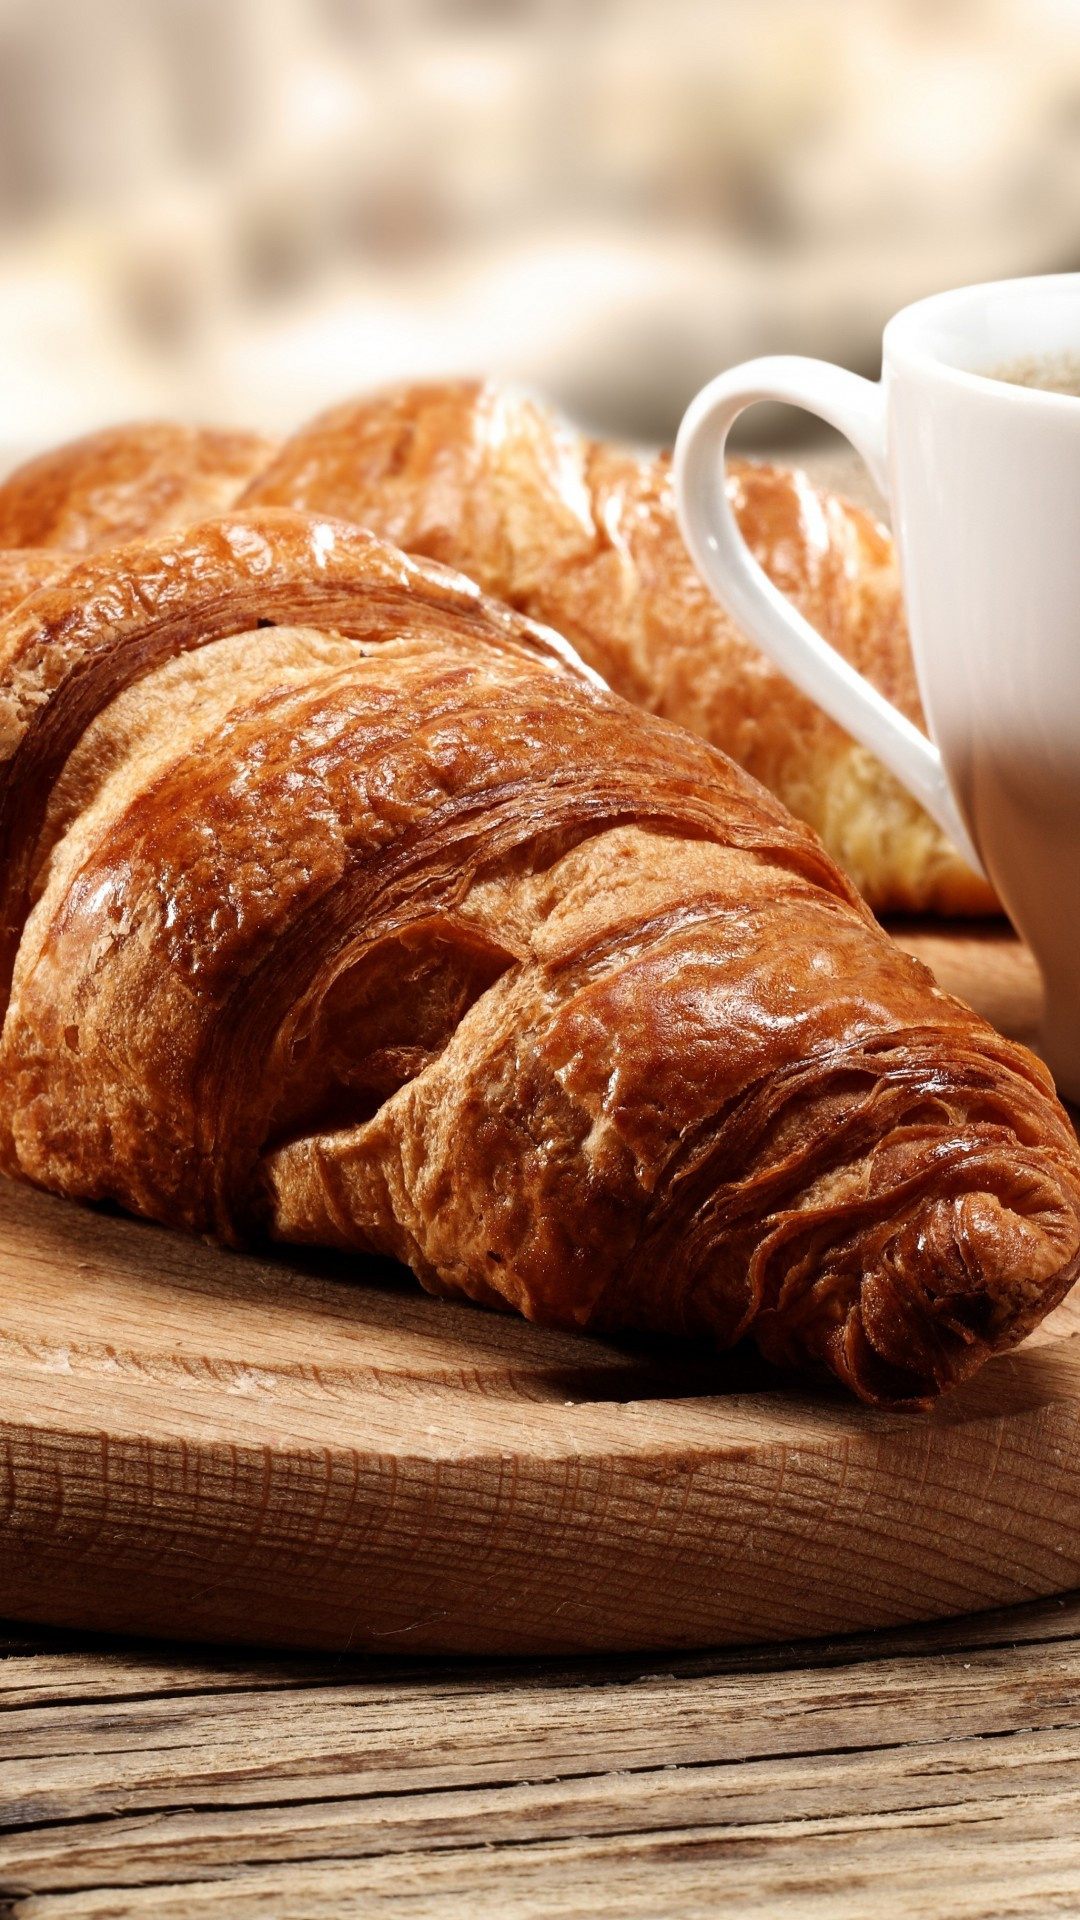 Croissant: Available in many bakeries and cafes worldwide, Coffee, Breakfast. 1080x1920 Full HD Wallpaper.